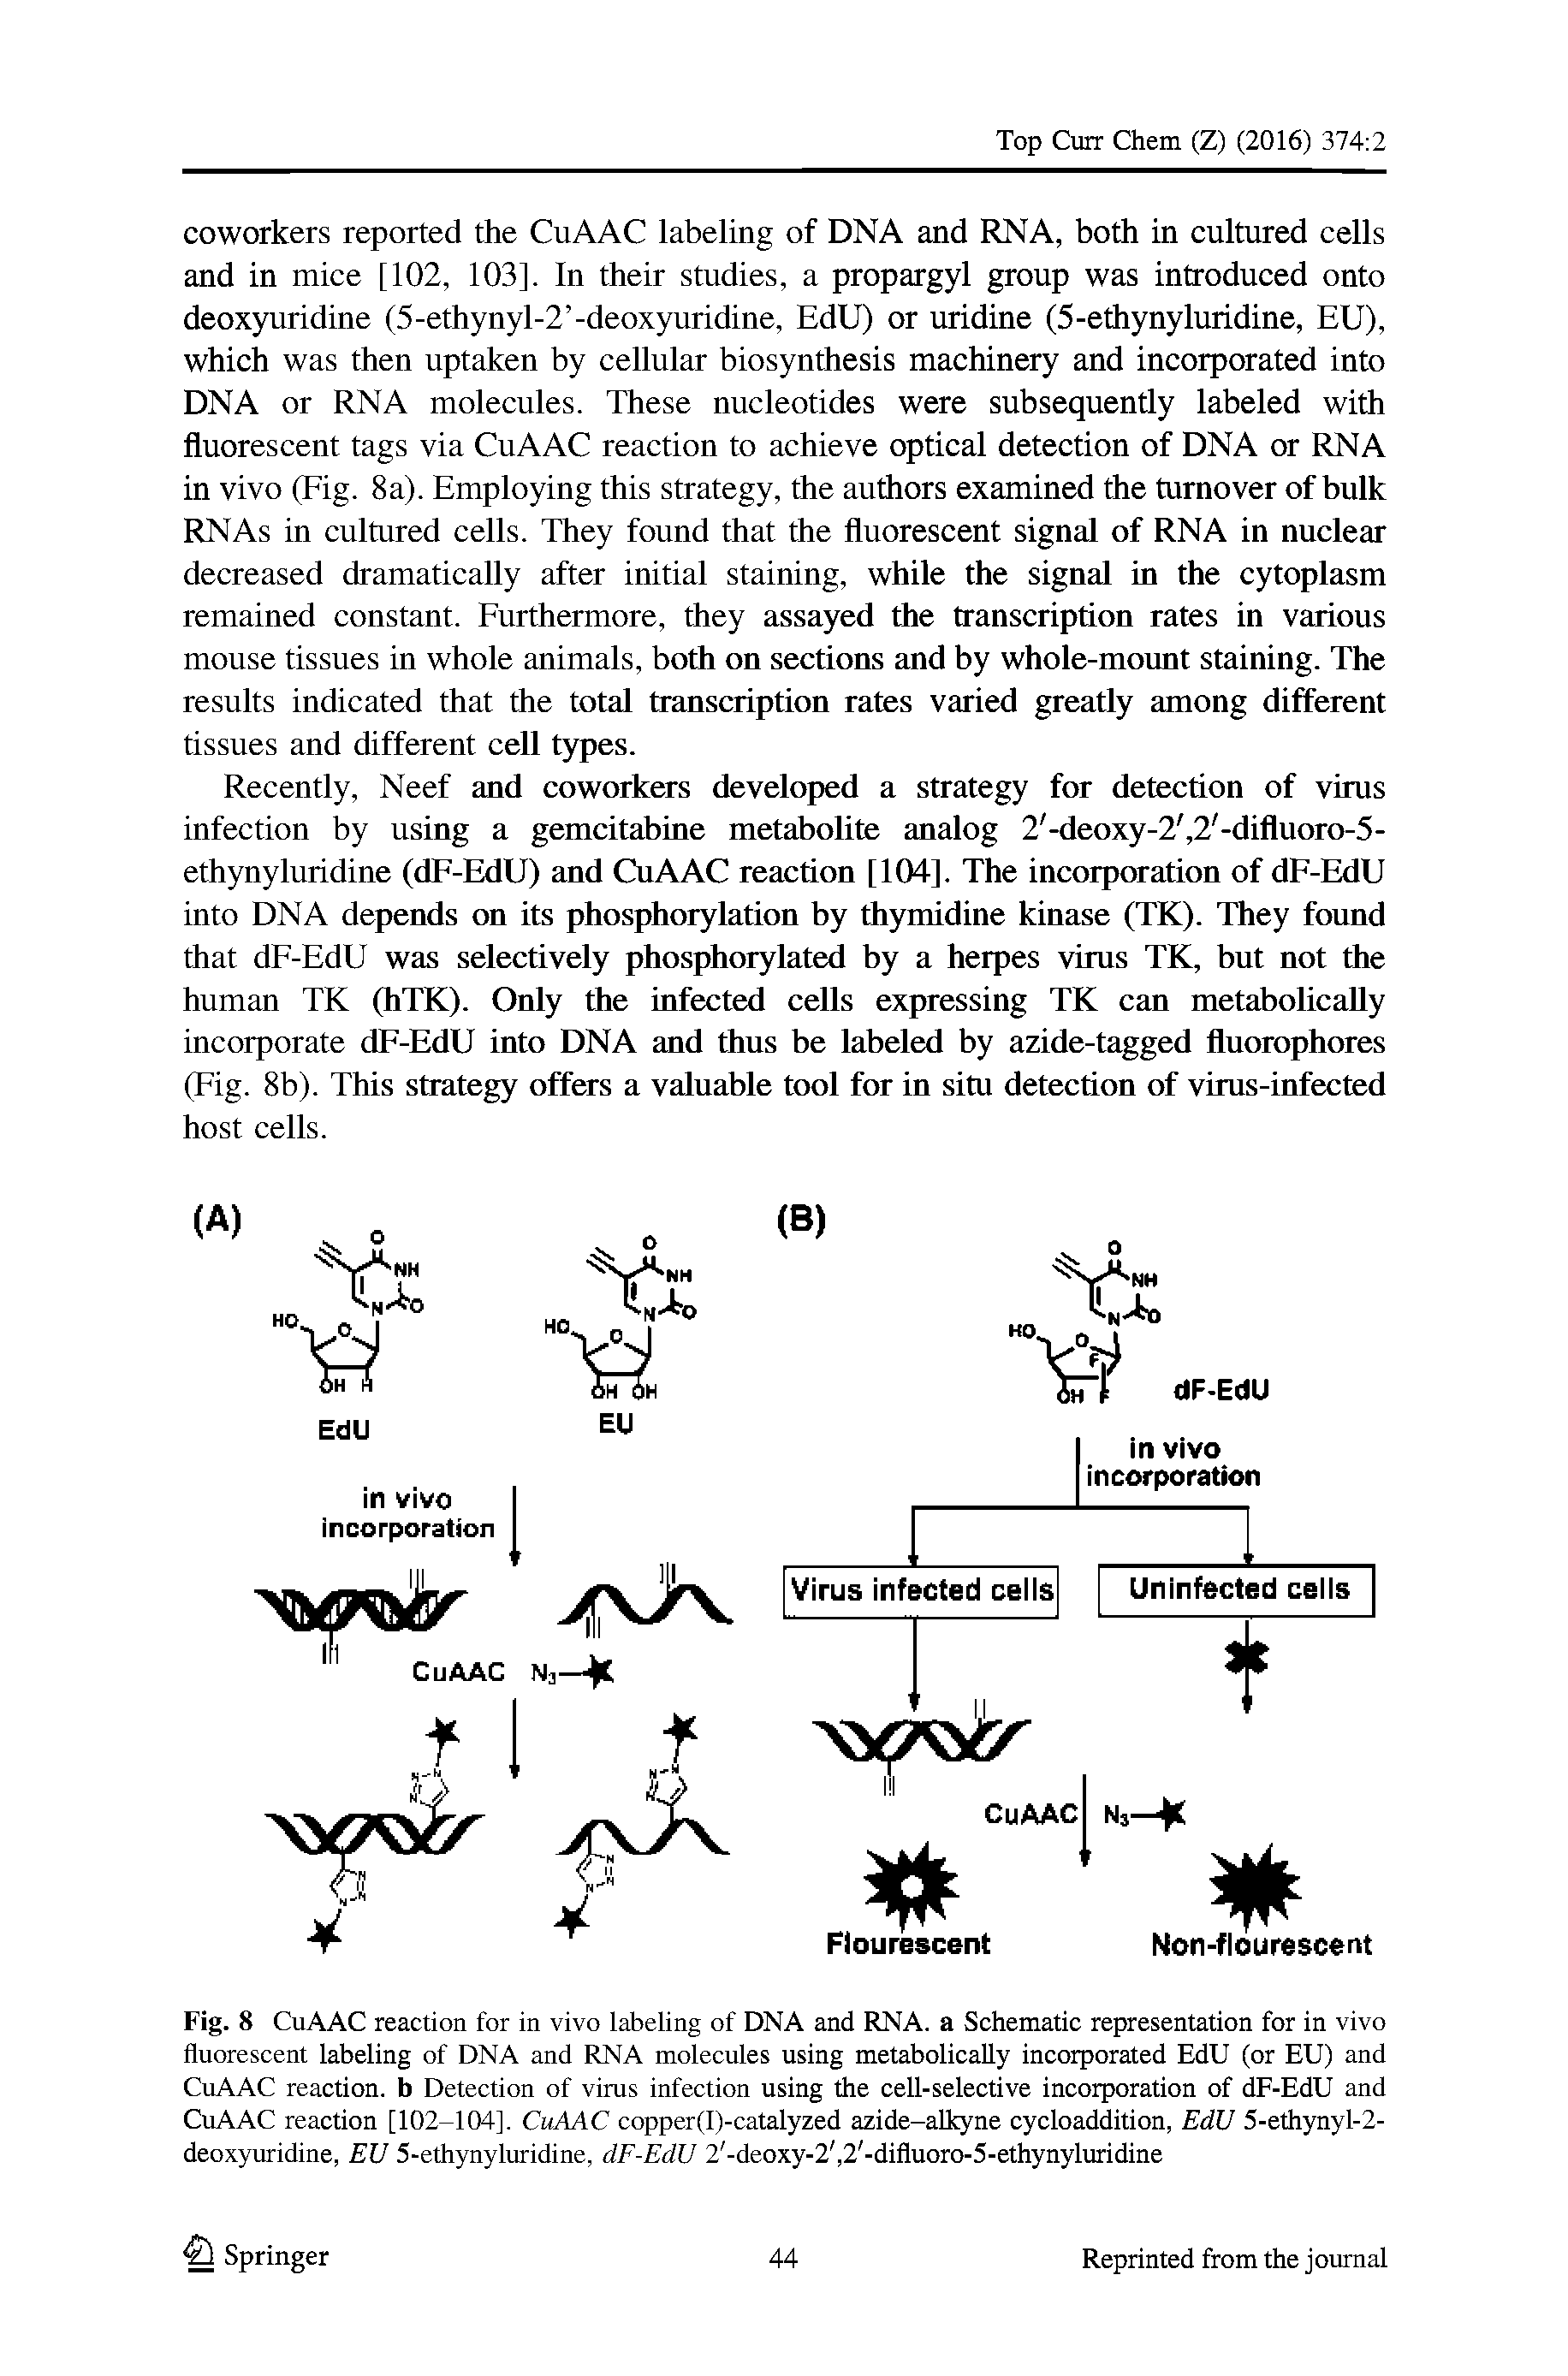 Fig. 8 CuAAC reaction for in vivo labeling of DNA and RNA. a Schematic representation for in vivo fluorescent labeling of DNA and RNA molecules using metaboUcally incorporated EdU (or EU) and CuAAC reaction, b Detection of vims infection using the ceU-selective incorporation of dF-EdU and CuAAC reaction [102-104]. CuAAC copper(I)-catalyzed azide-aUcyne cycloaddition, EdU 5-ethynyl-2-deoxyuridine, EU 5-ethynyluridine, dF-EdU 2 -deoxy-2, 2 -difluoro-5-ethynyluridine...